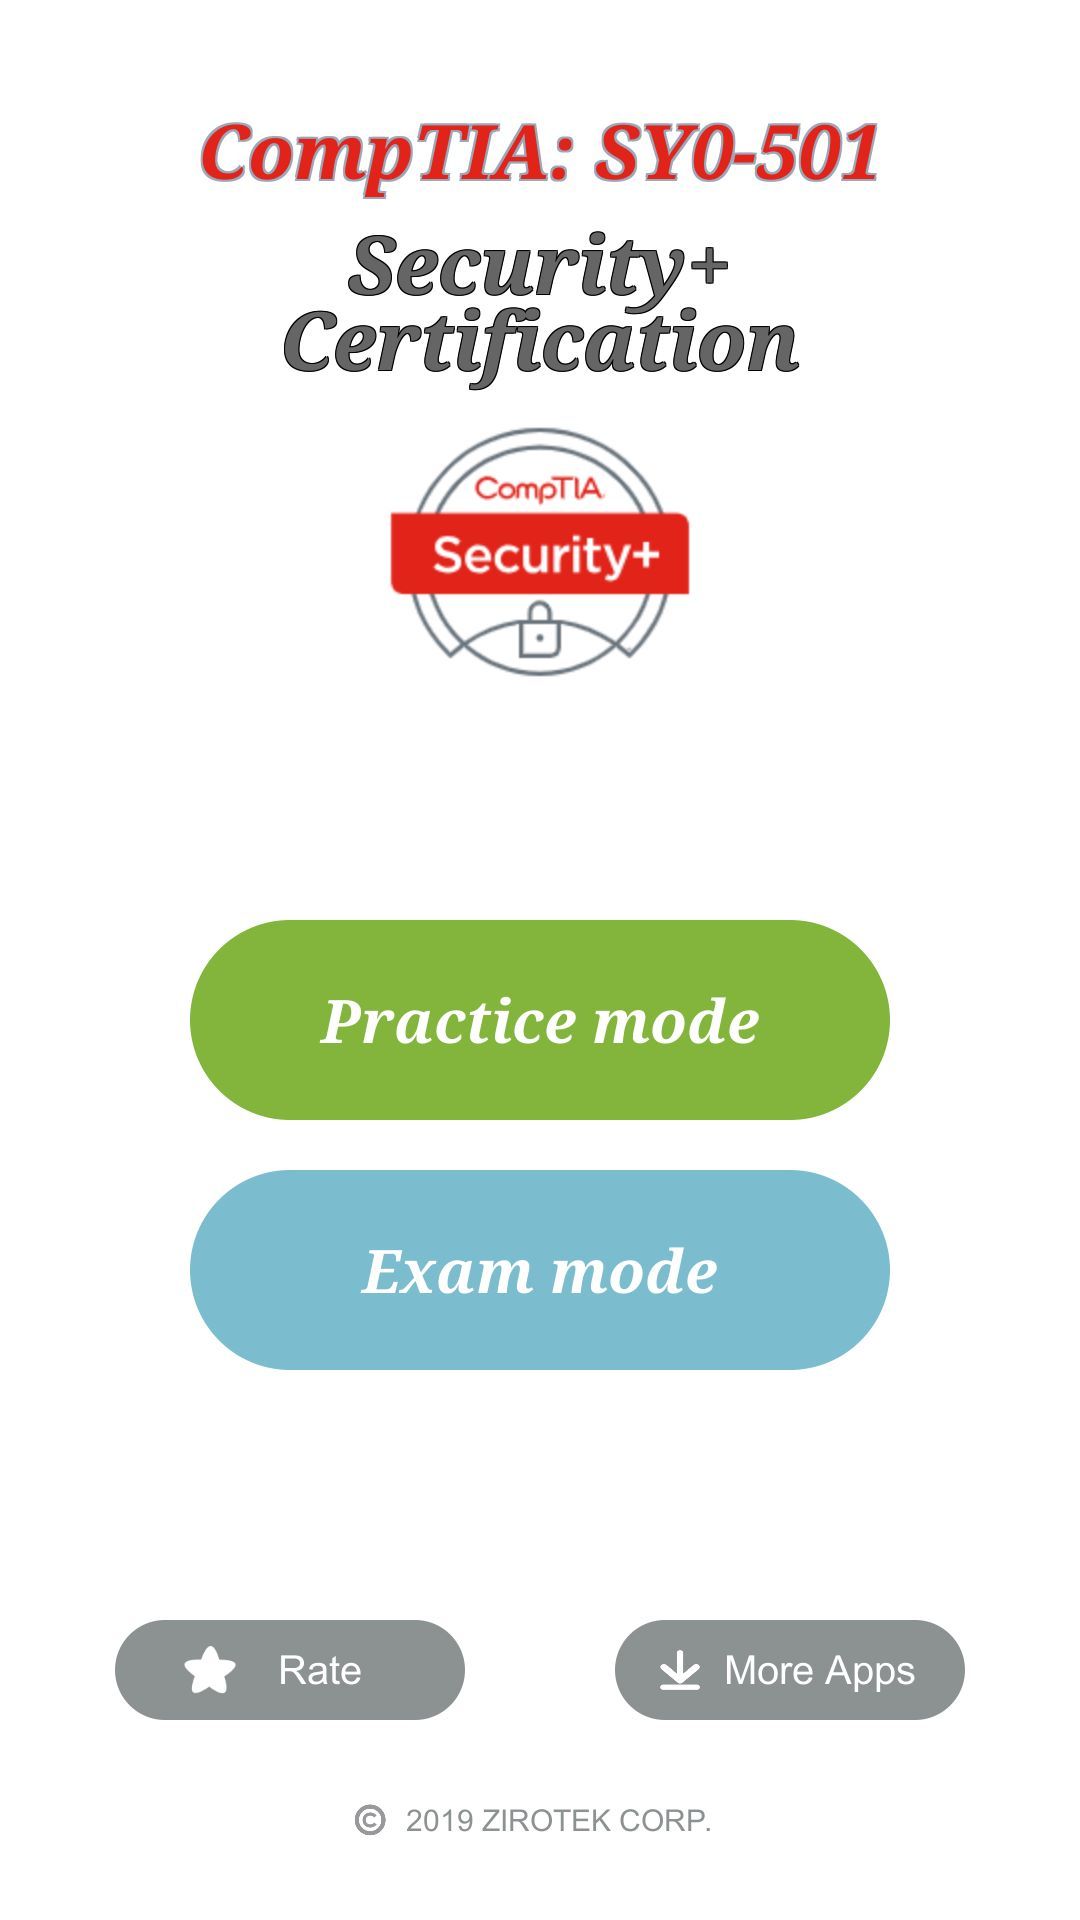 CompTIA Security+ Certification: SY0-501 Exam